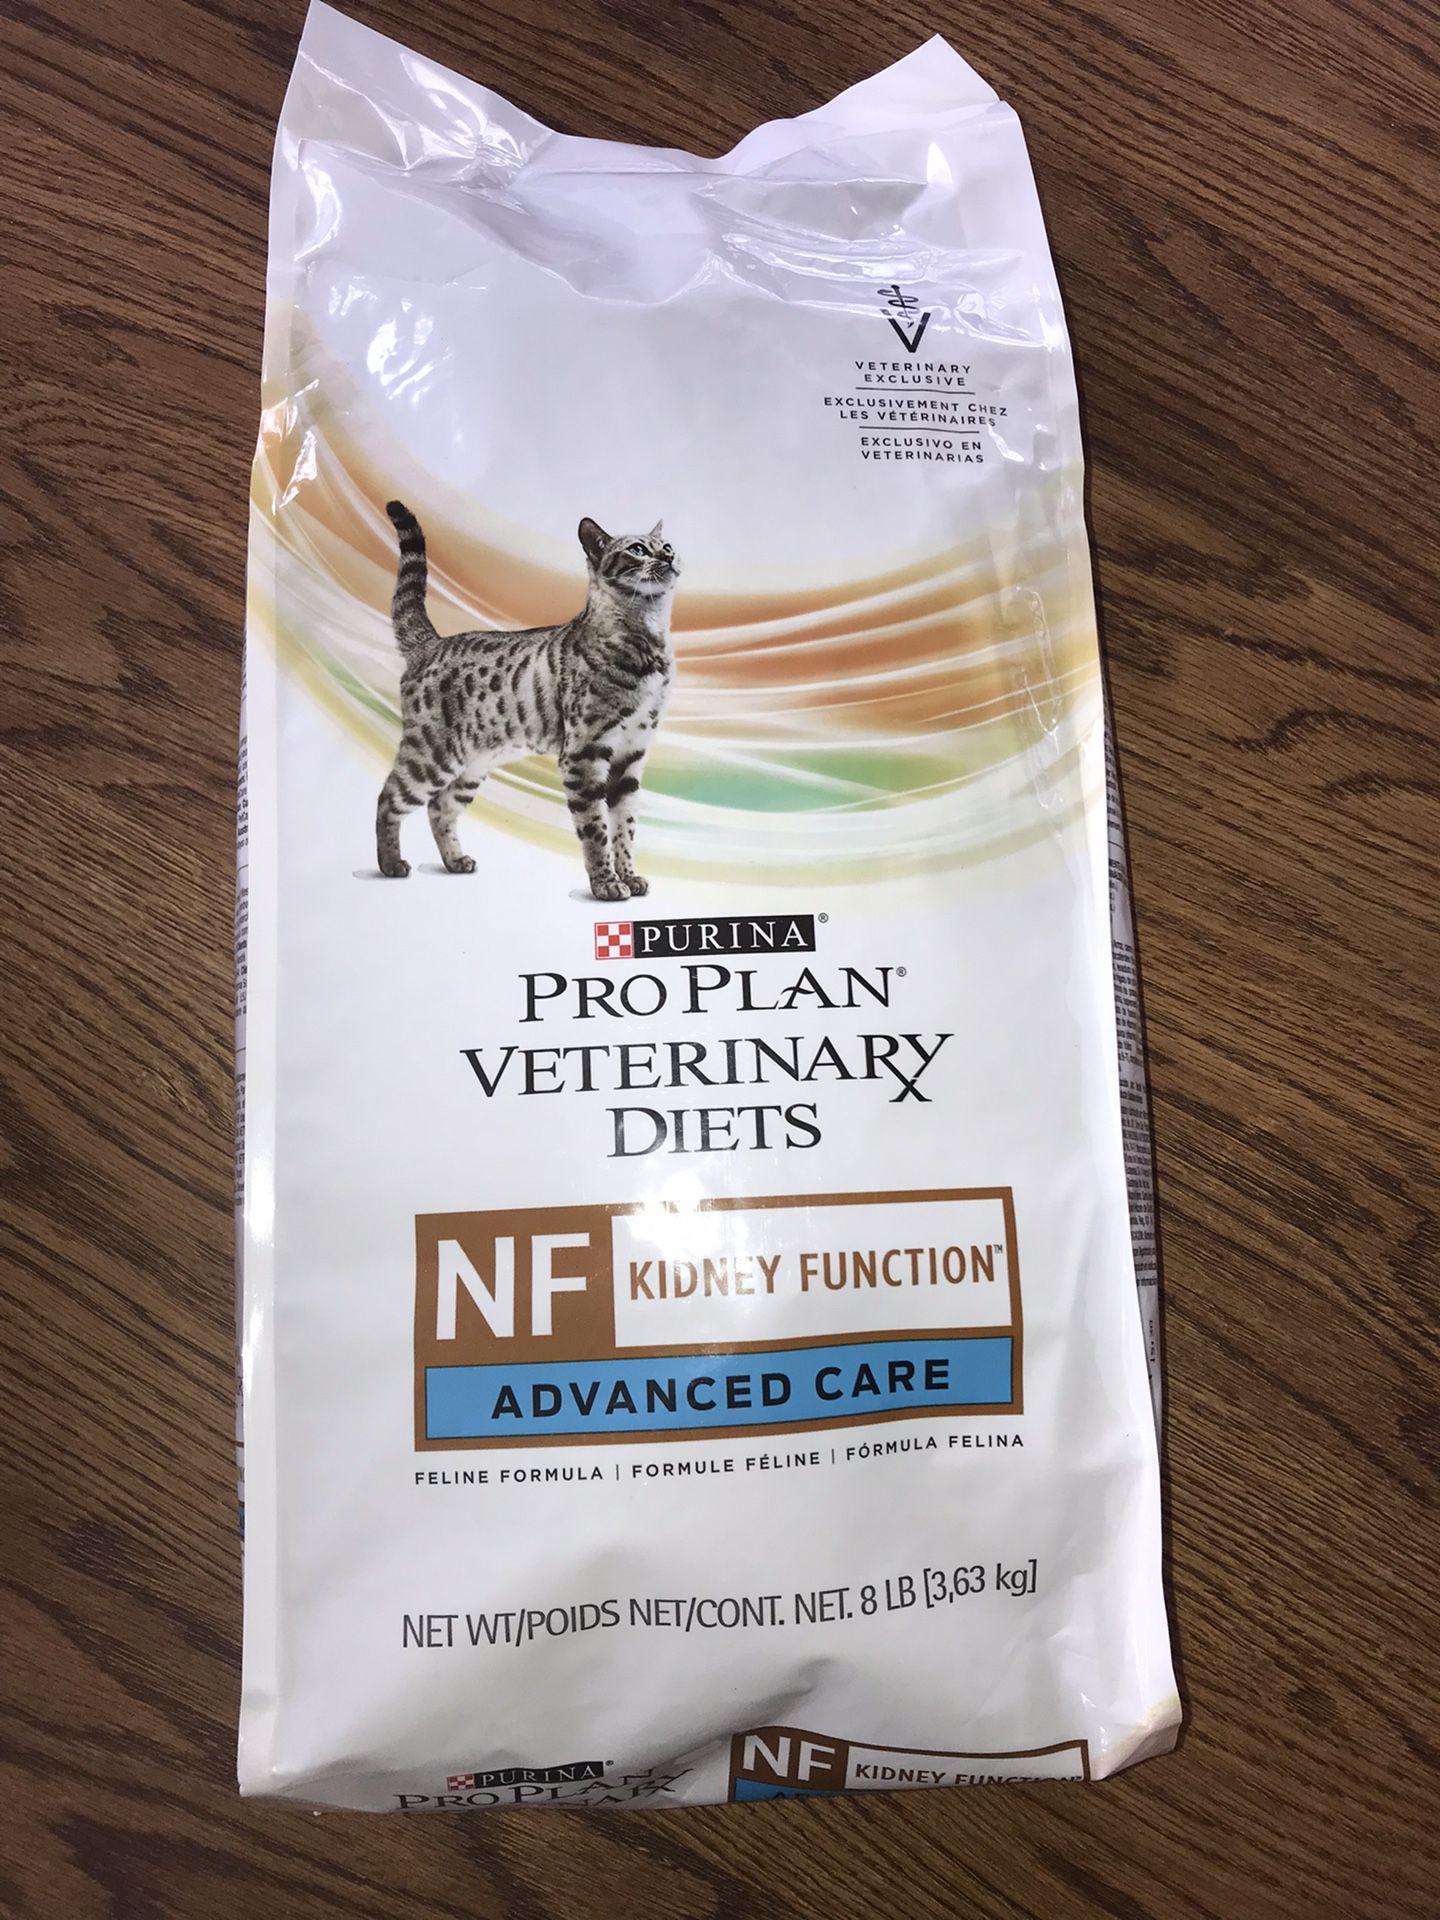 Purina Pro Plan Veterinary Diets NF Kidney Function Advanced Care, 8 Pound Bag